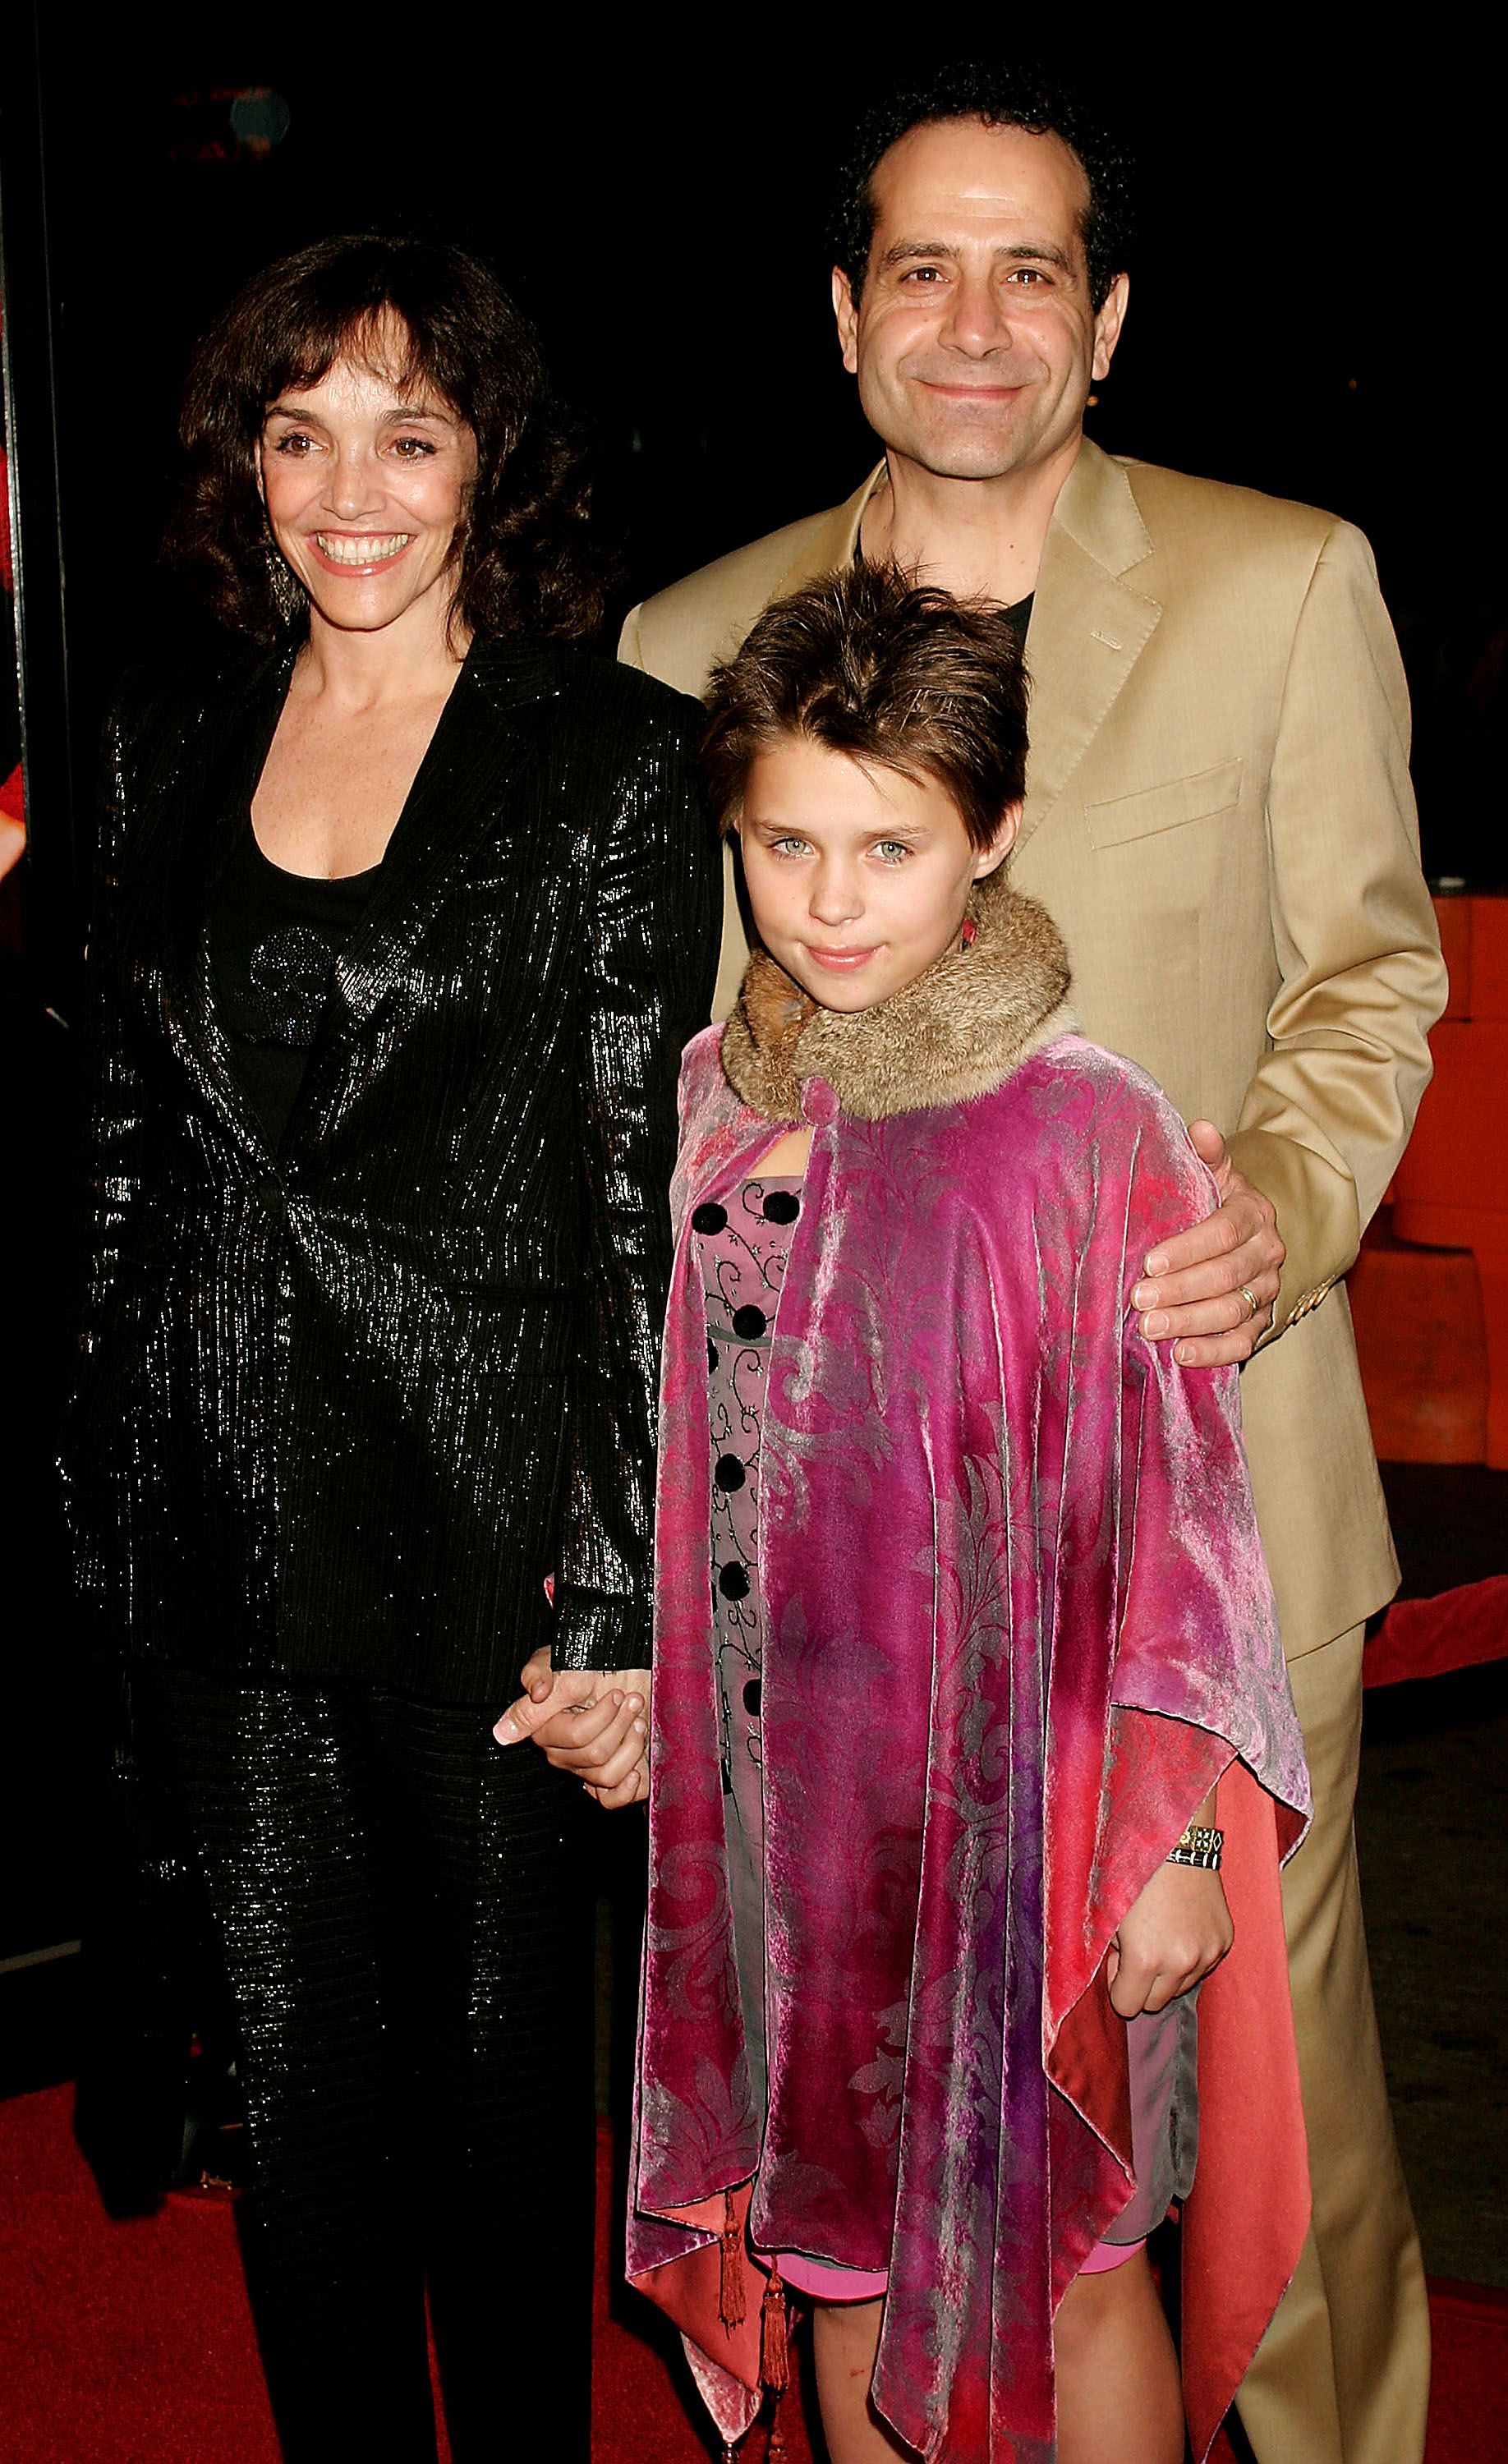 Brooke Adams, Tony Shalhoub and their daughter Sophie at the premiere of "Against the Ropes" in 2004 in Hollywood, California | Source: Getty Images